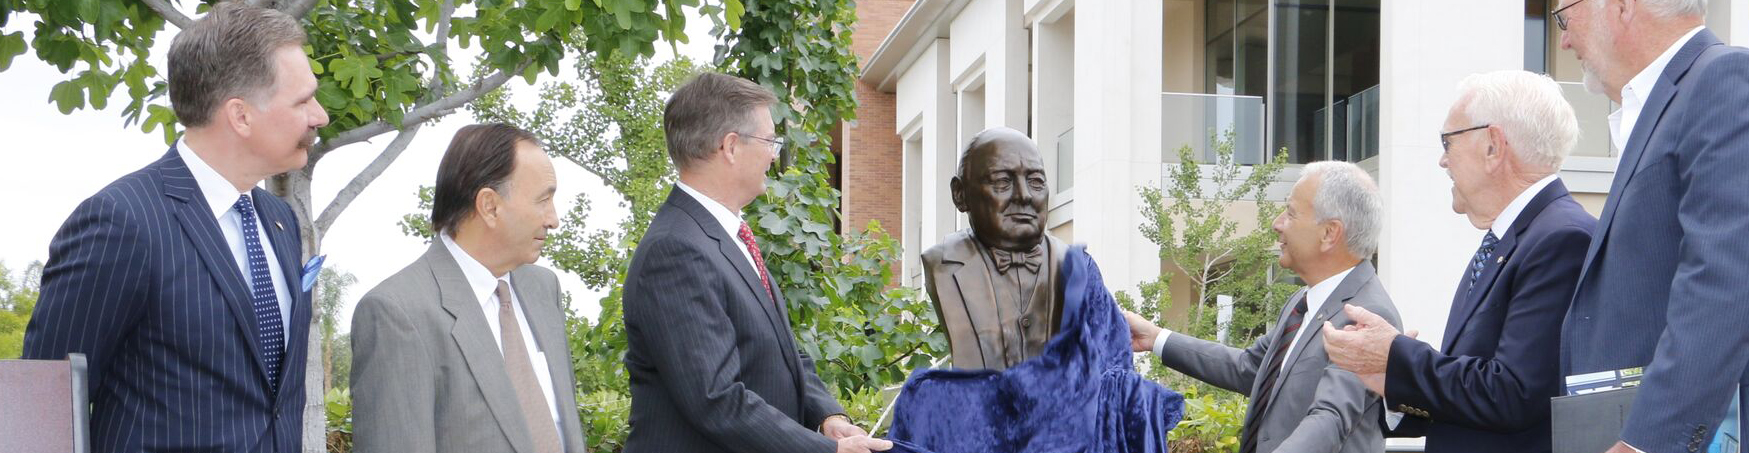 Unveiling the Churchill bust.